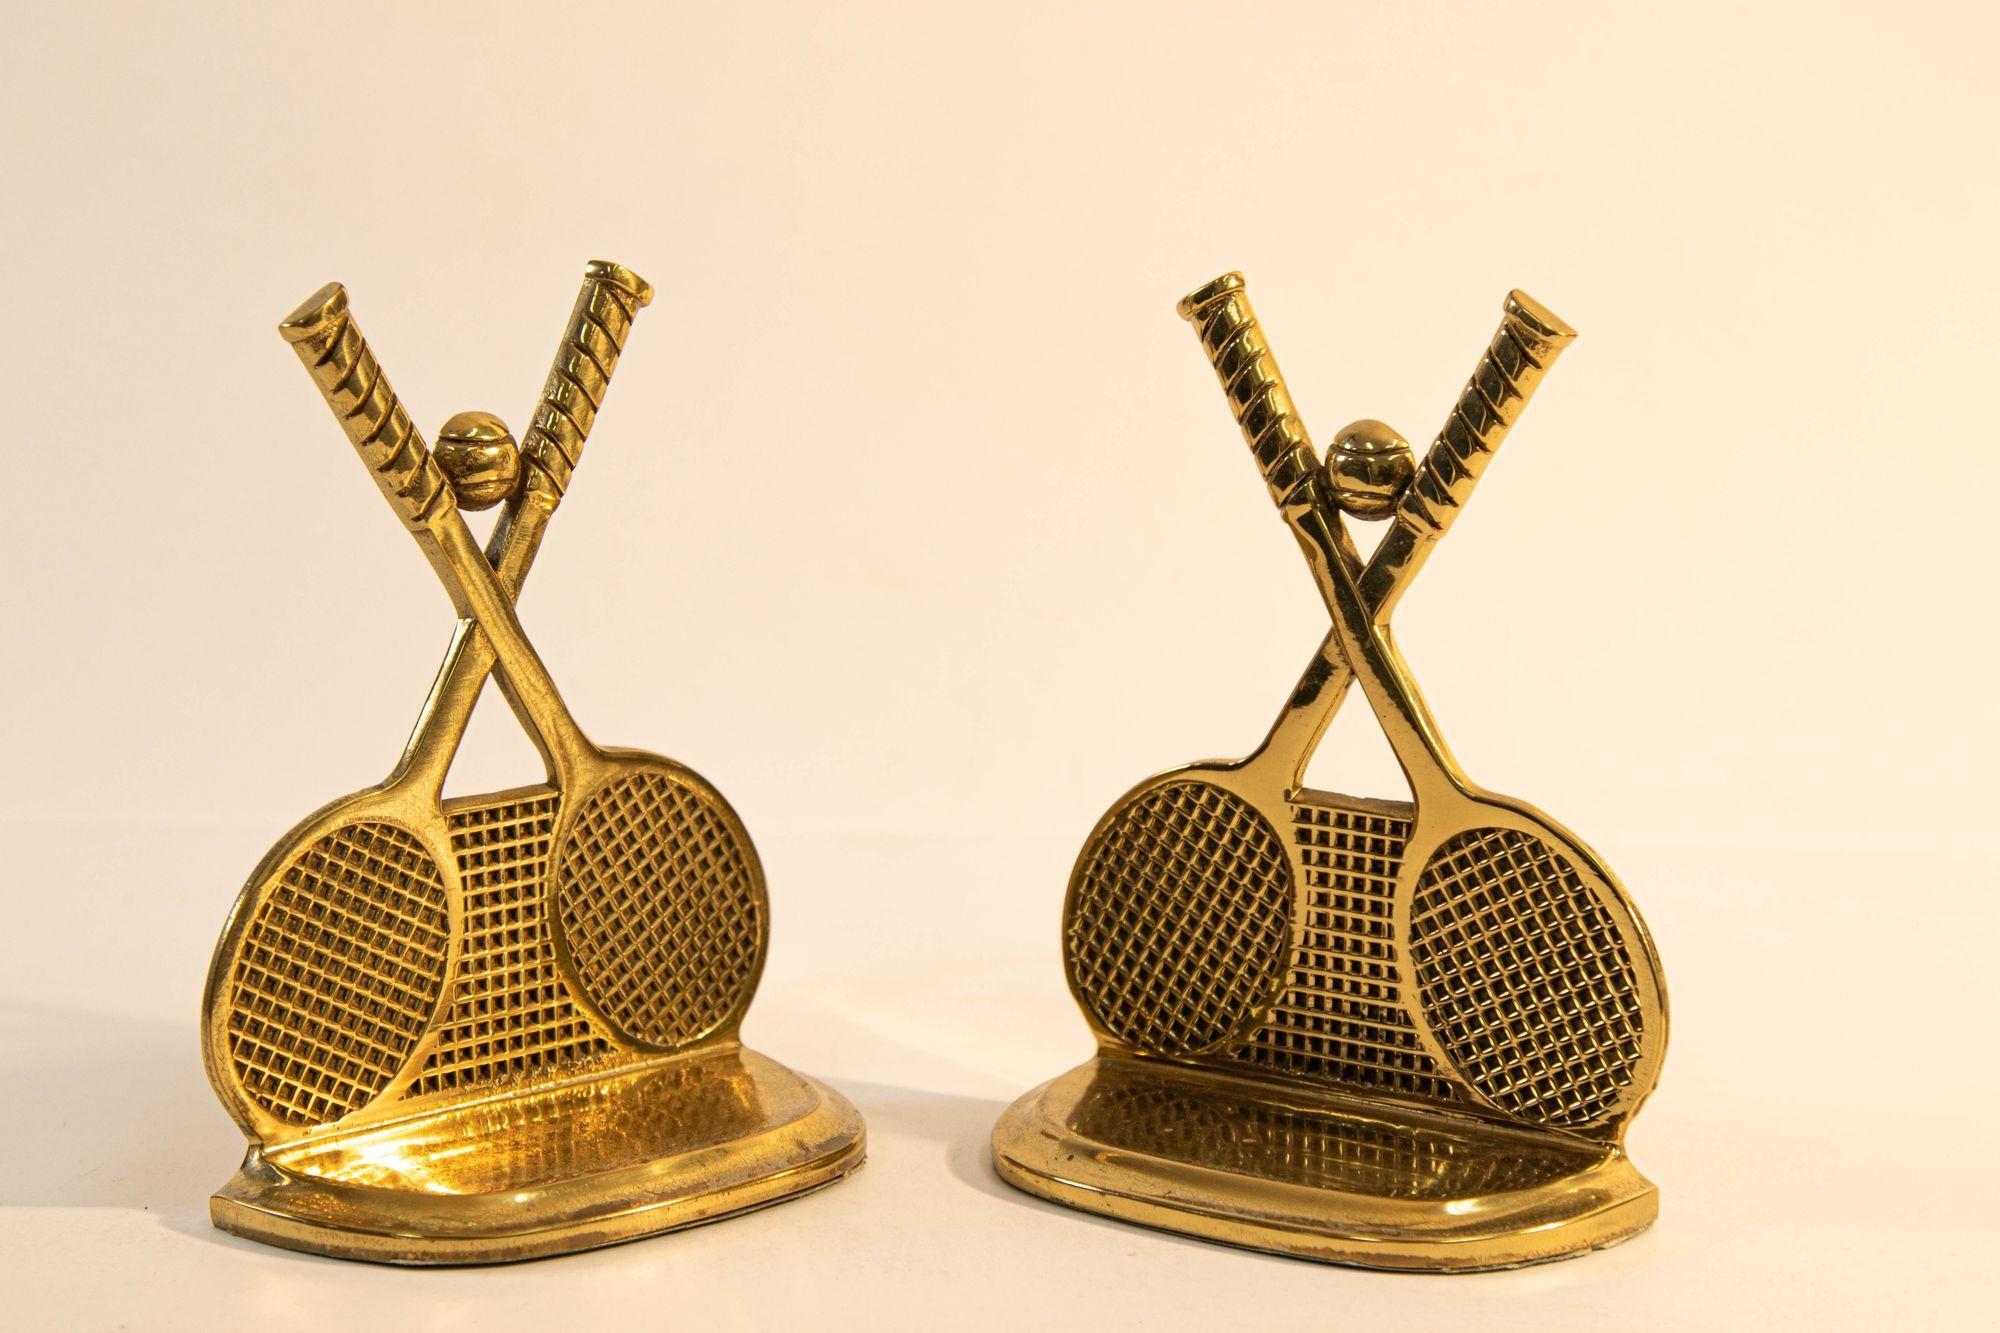 Pair of Vintage Brass Tennis Racket and Ball Bookends Vintage 1970s Collectible 3